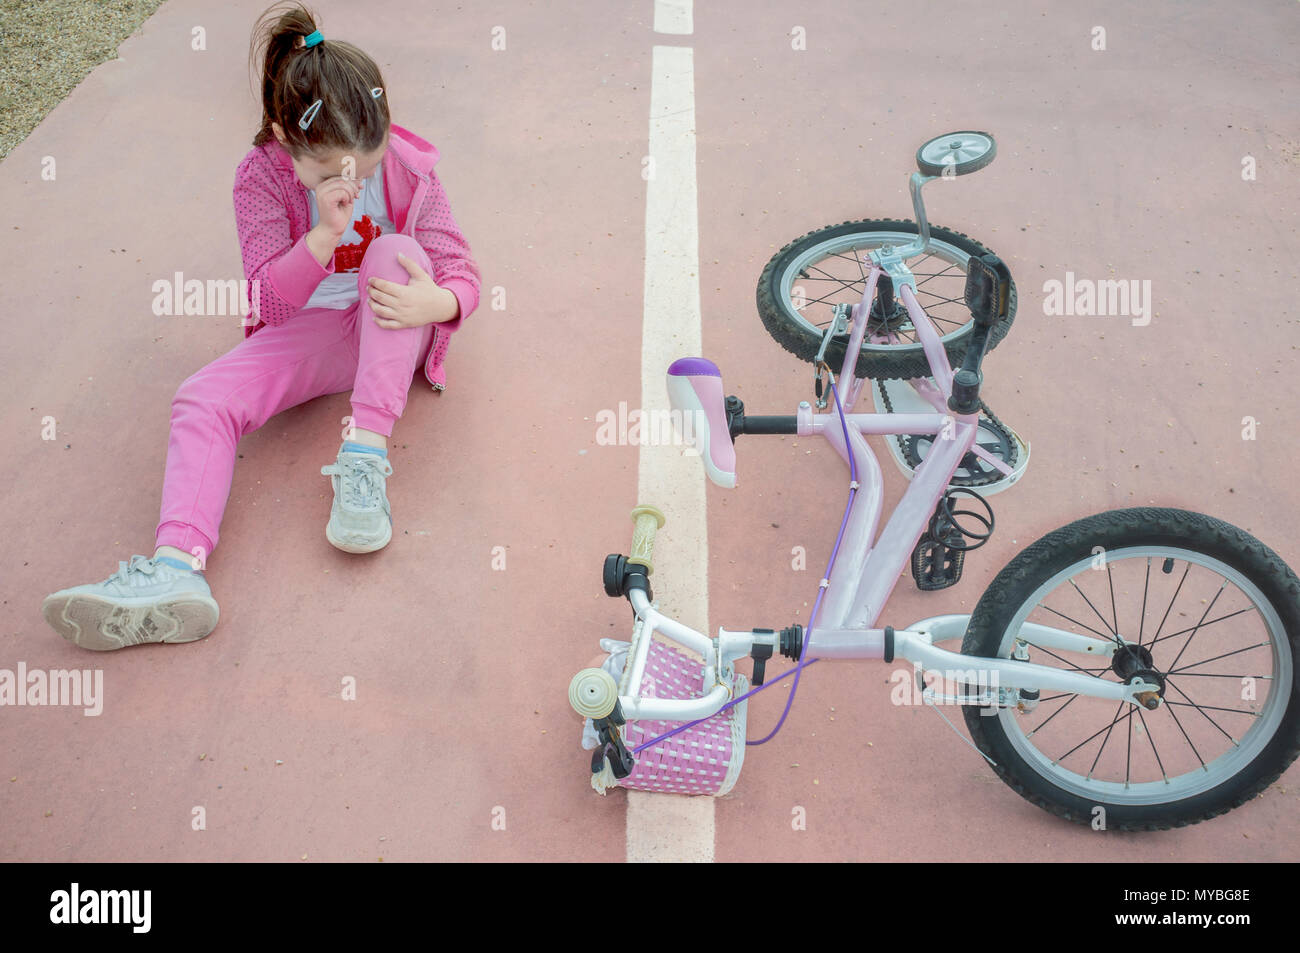 Child girl crying after bike accident. Pink female bike on floor with training wheels Stock Photo